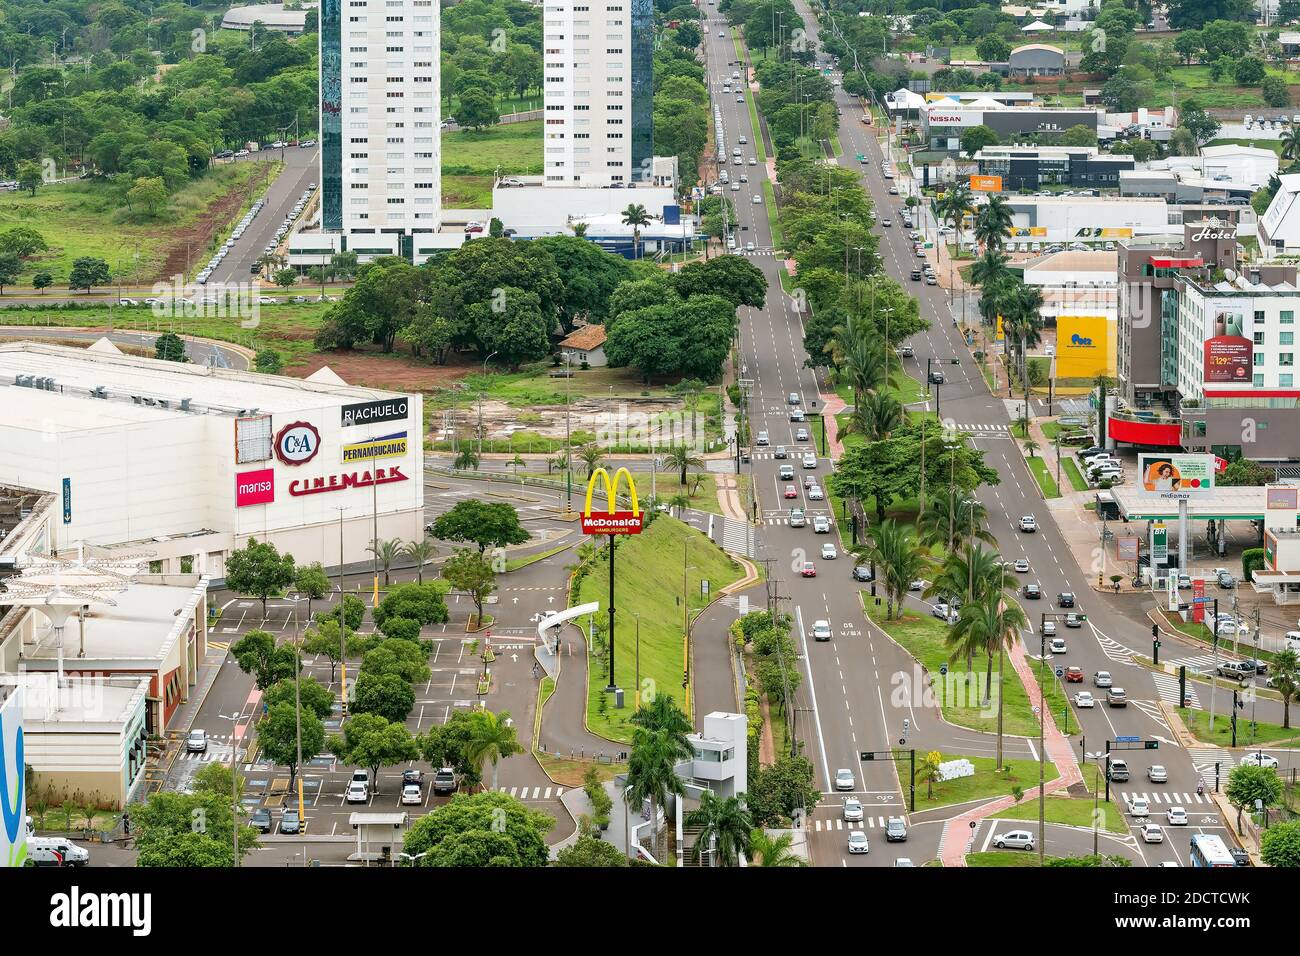 Campo Grande - MS, Brazil - november 12, 2020: Aerial view of the Afonso Pena avenue in front of the Shopping Campo Grande mall. Stock Photo